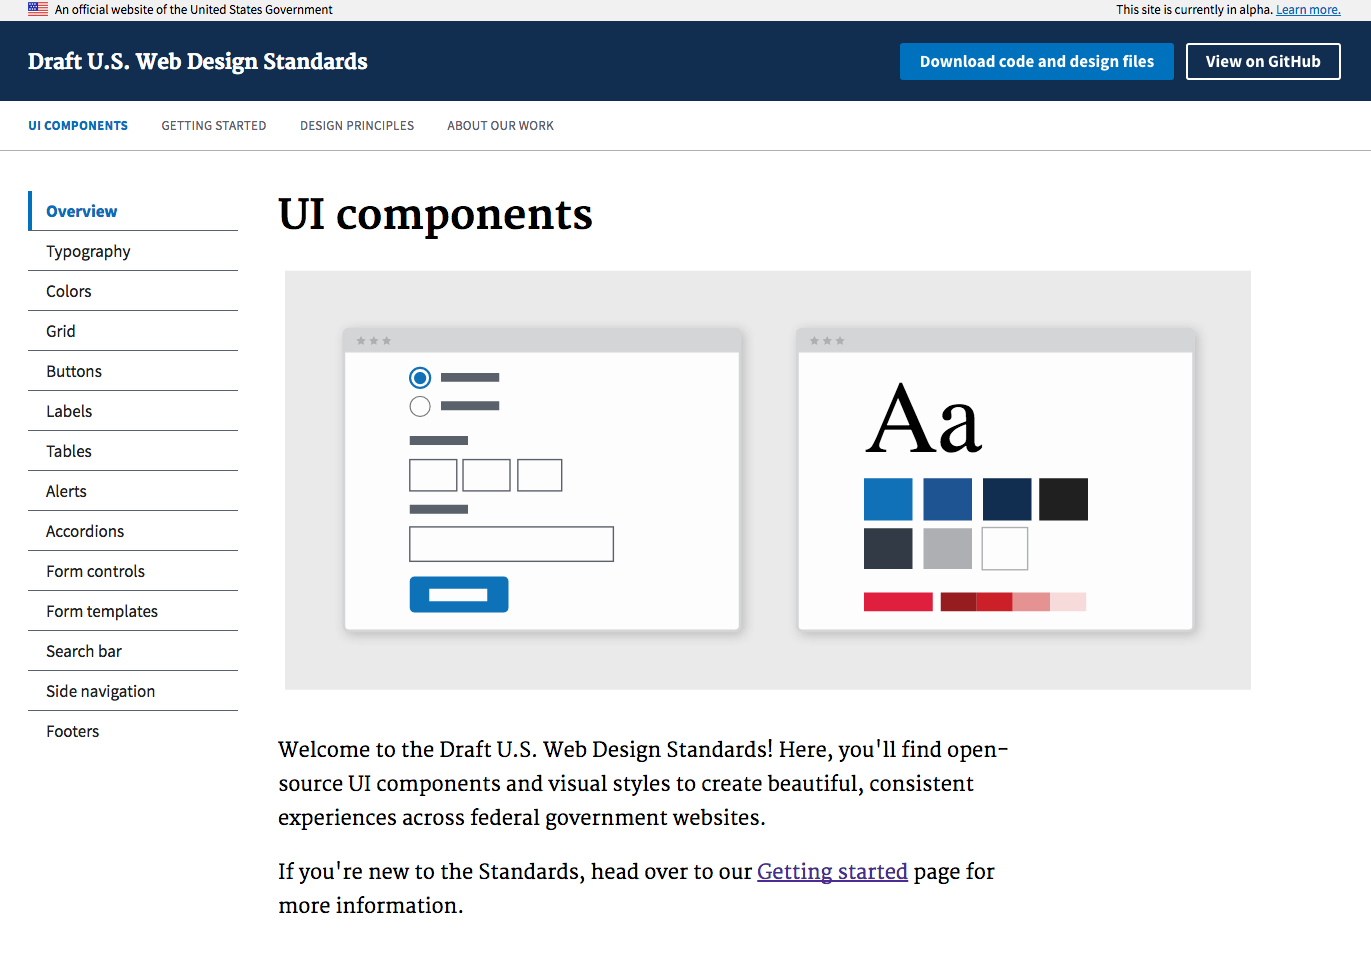 The Draft U.S. Web Design Standards are the design system for the United States federal government.